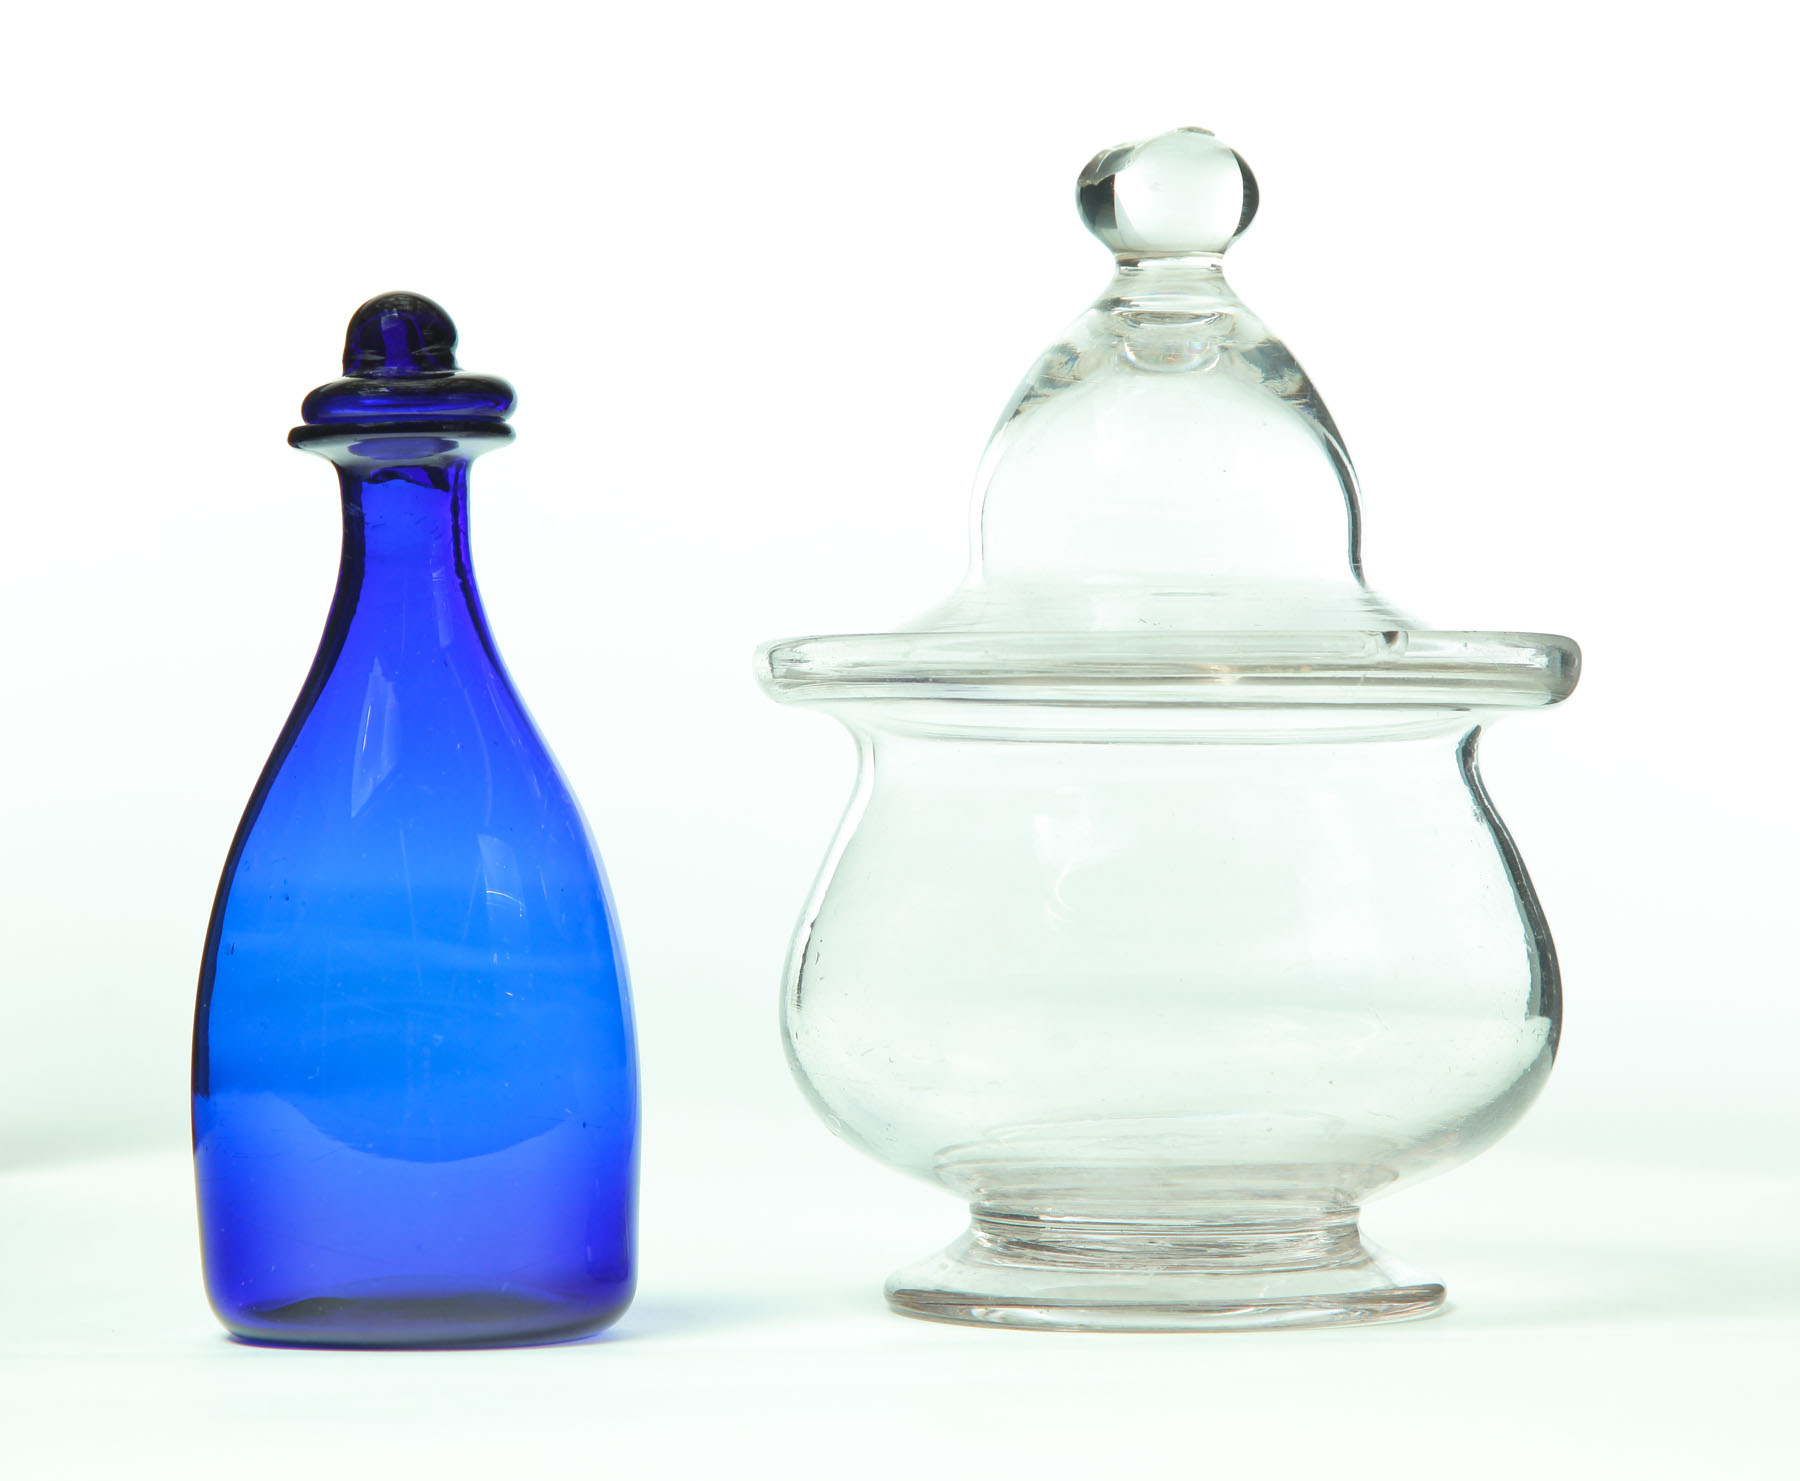 GLASS SUGAR BOWL AND BOTTLE.  Mid 19th